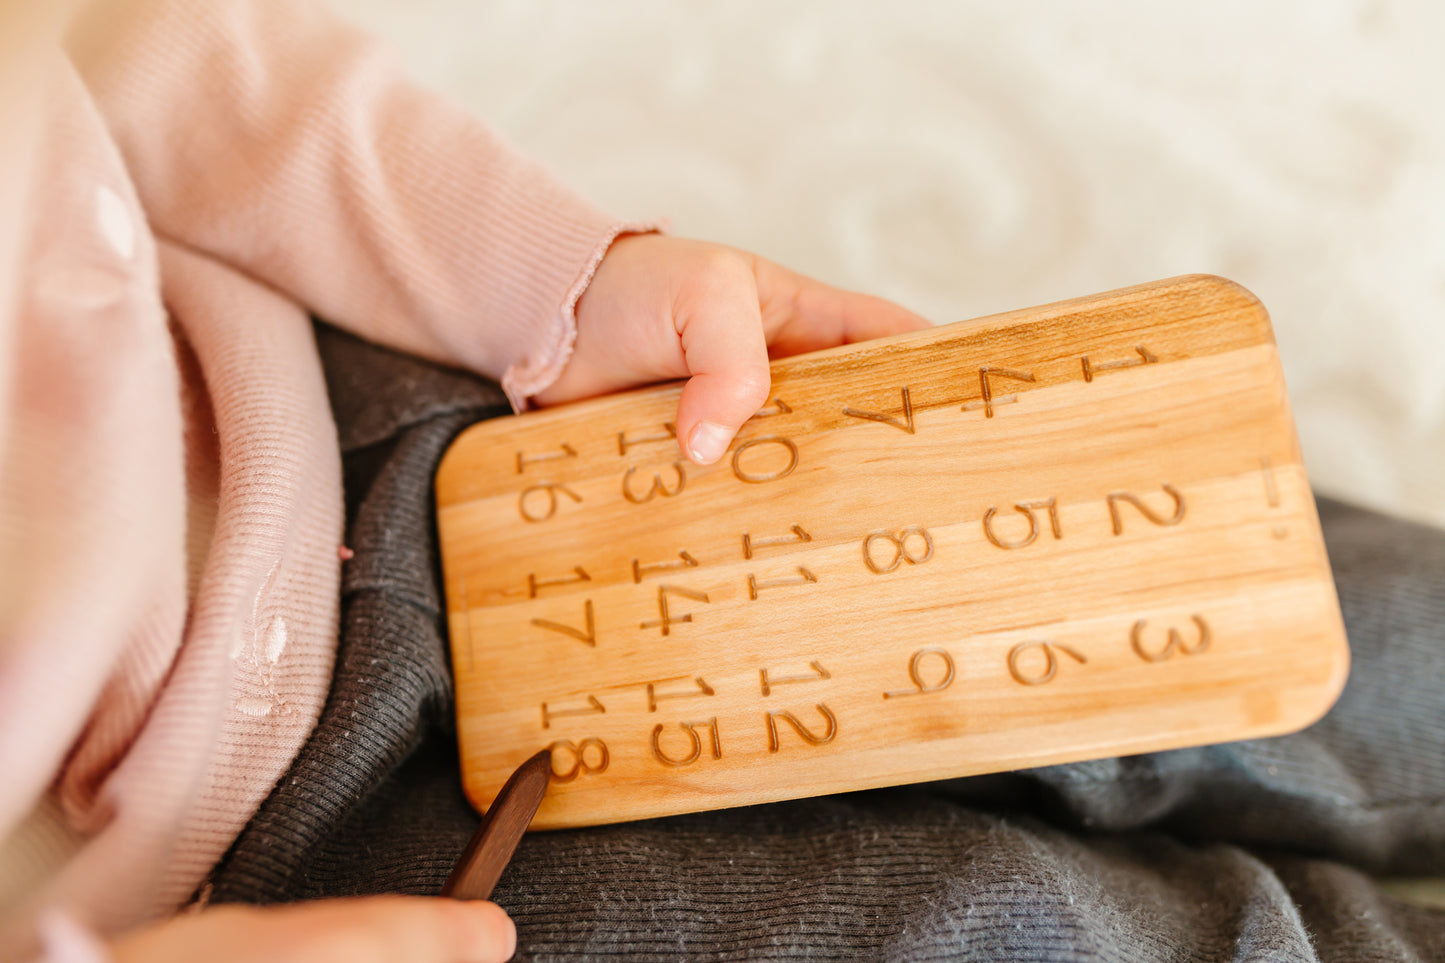 Little baby boy joyfully playing with iDoddle, using it to trace and practice writing numbers from 1 to 18. This interactive and educational activity helps him develop his counting skills and fine motor abilities while having fun with the wooden toy.